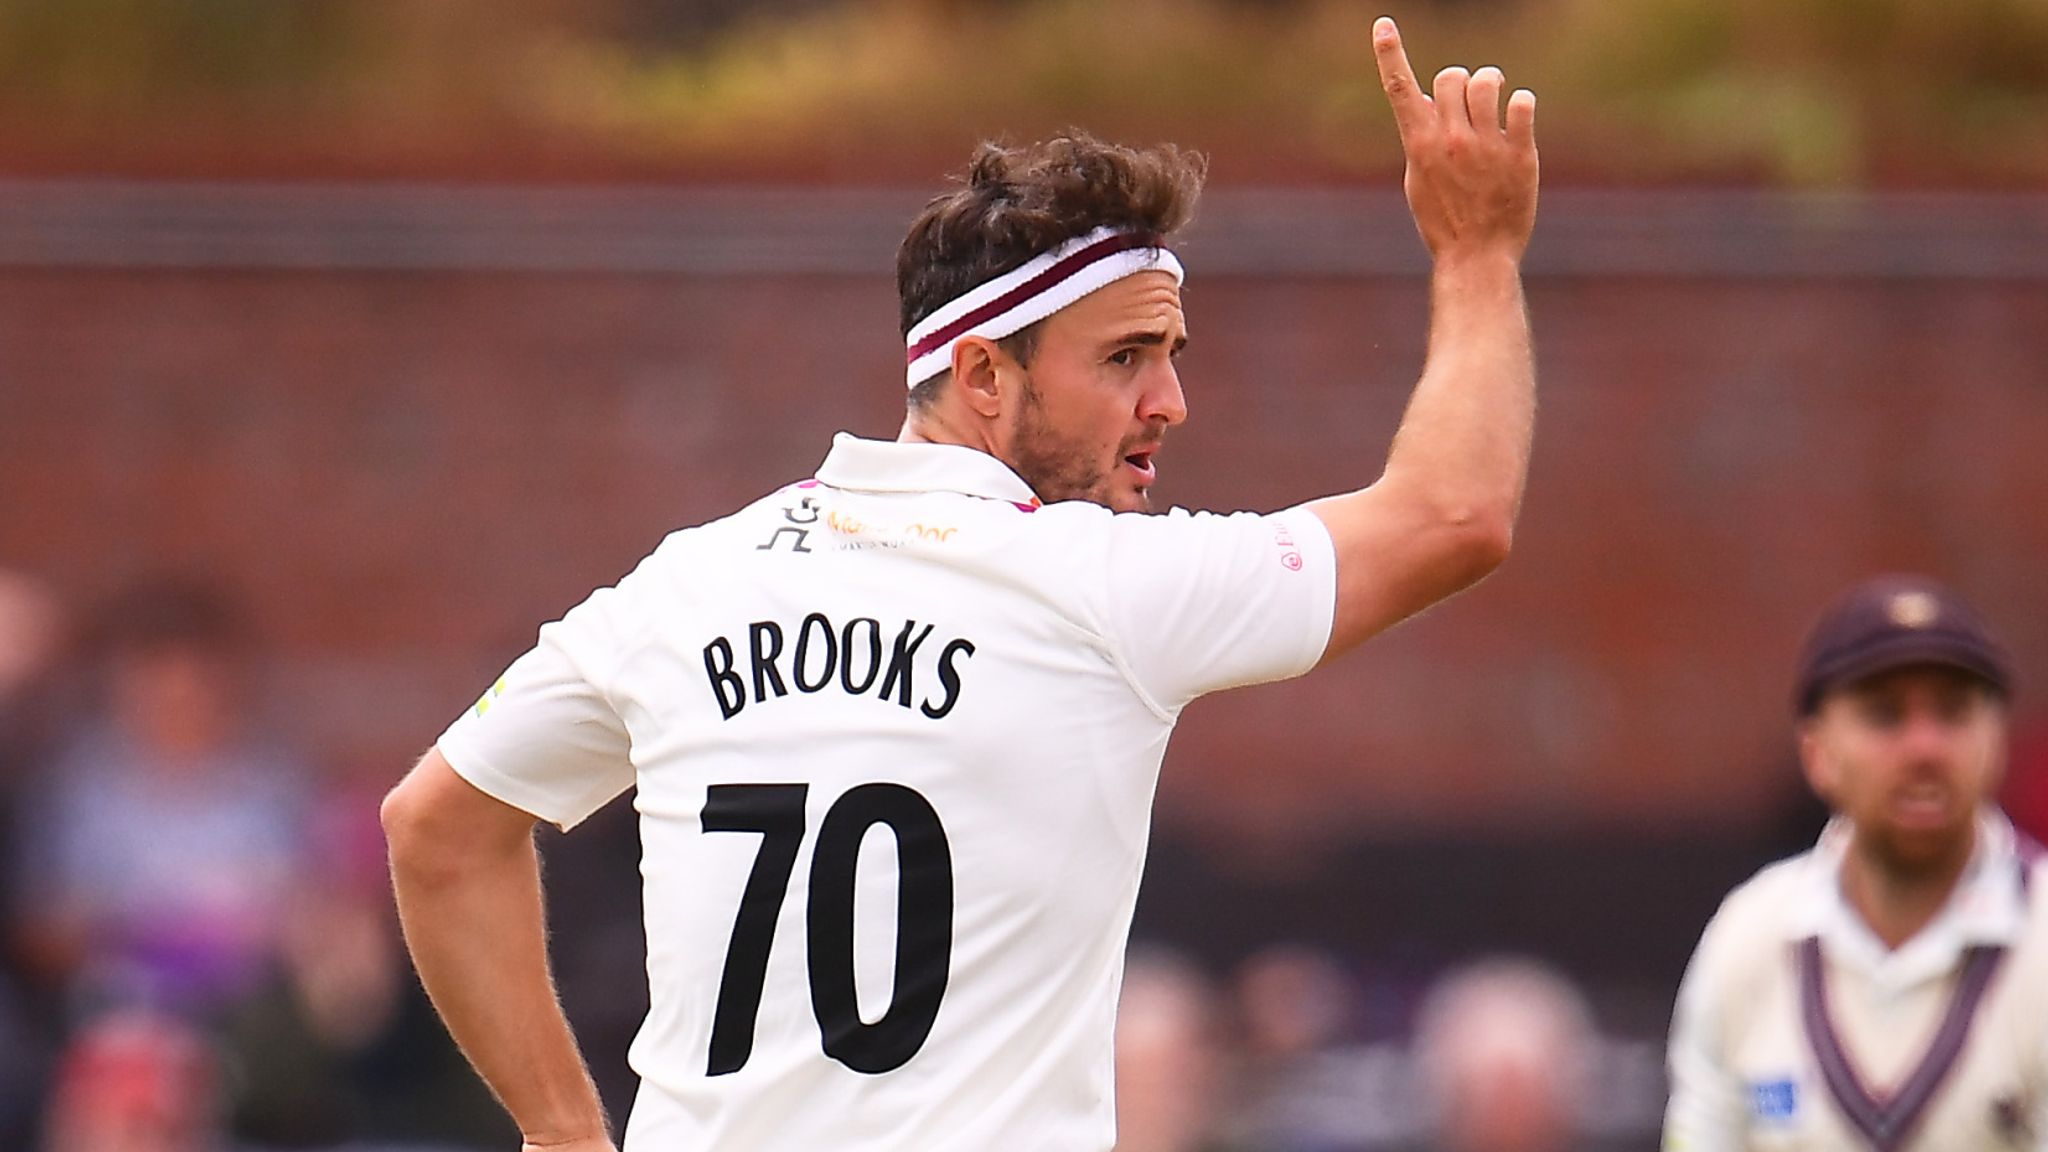 Jack Brooks reprimanded over historical tweets by Somerset and to undergo  training on diversity | Cricket News | Sky Sports